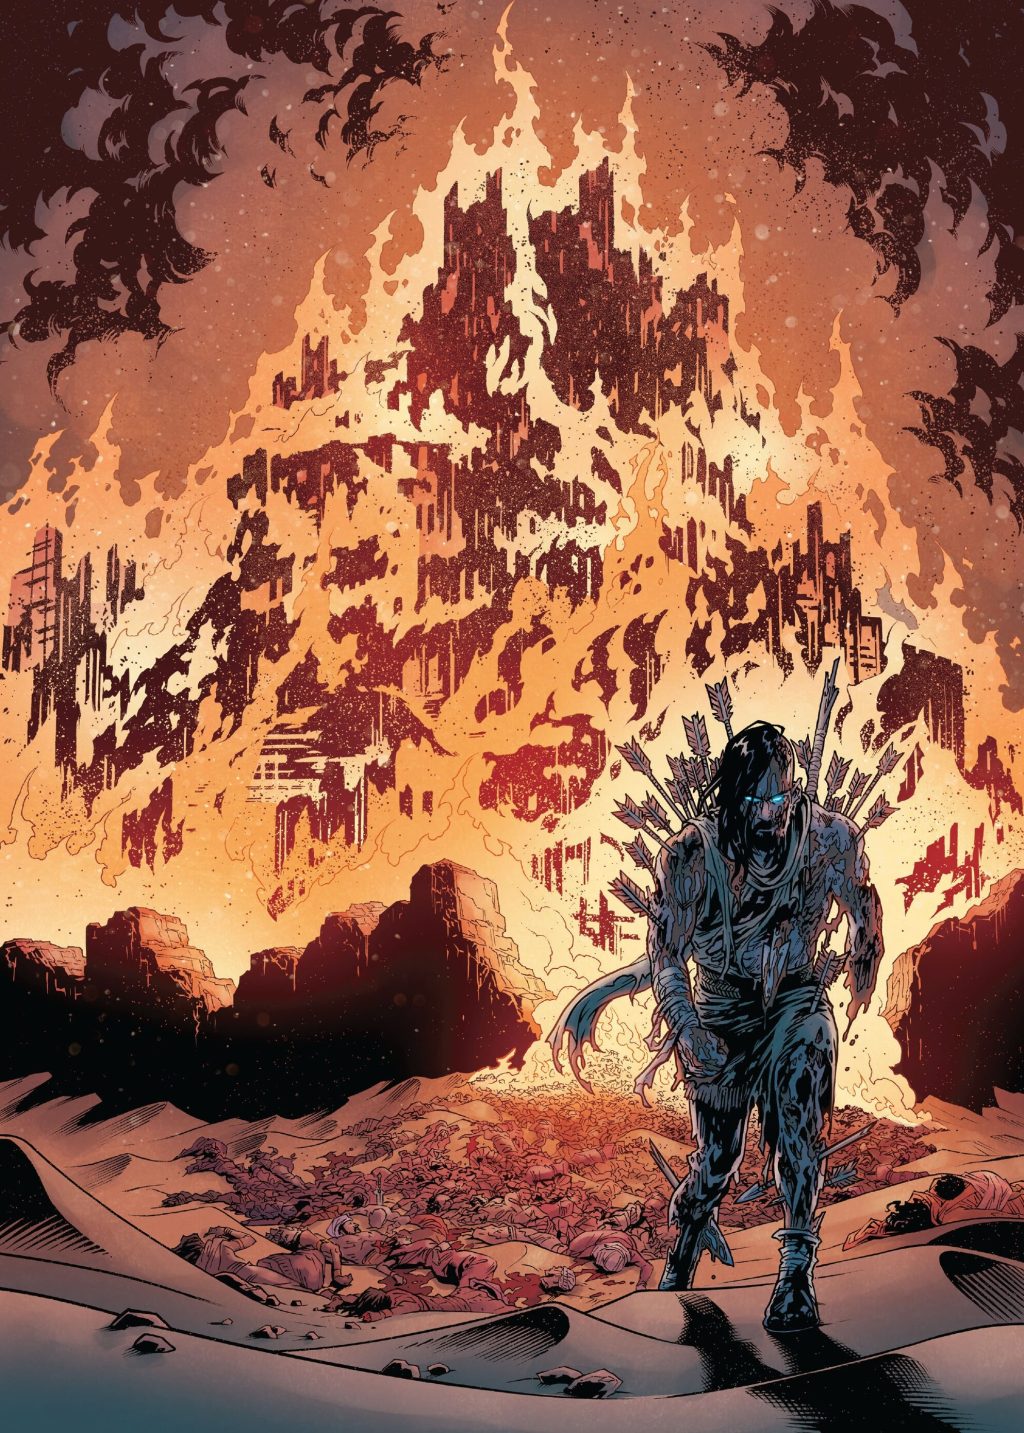 B devastates the city of Olos in BRZRKR: Fallen Empire Vol. 1 #1 (2024), BOOM! Studios. Text by Keanu Reeves and Mattson Tomlin, art by Rebekah Isaacs, Dee Cunniffe and Becca Carey.